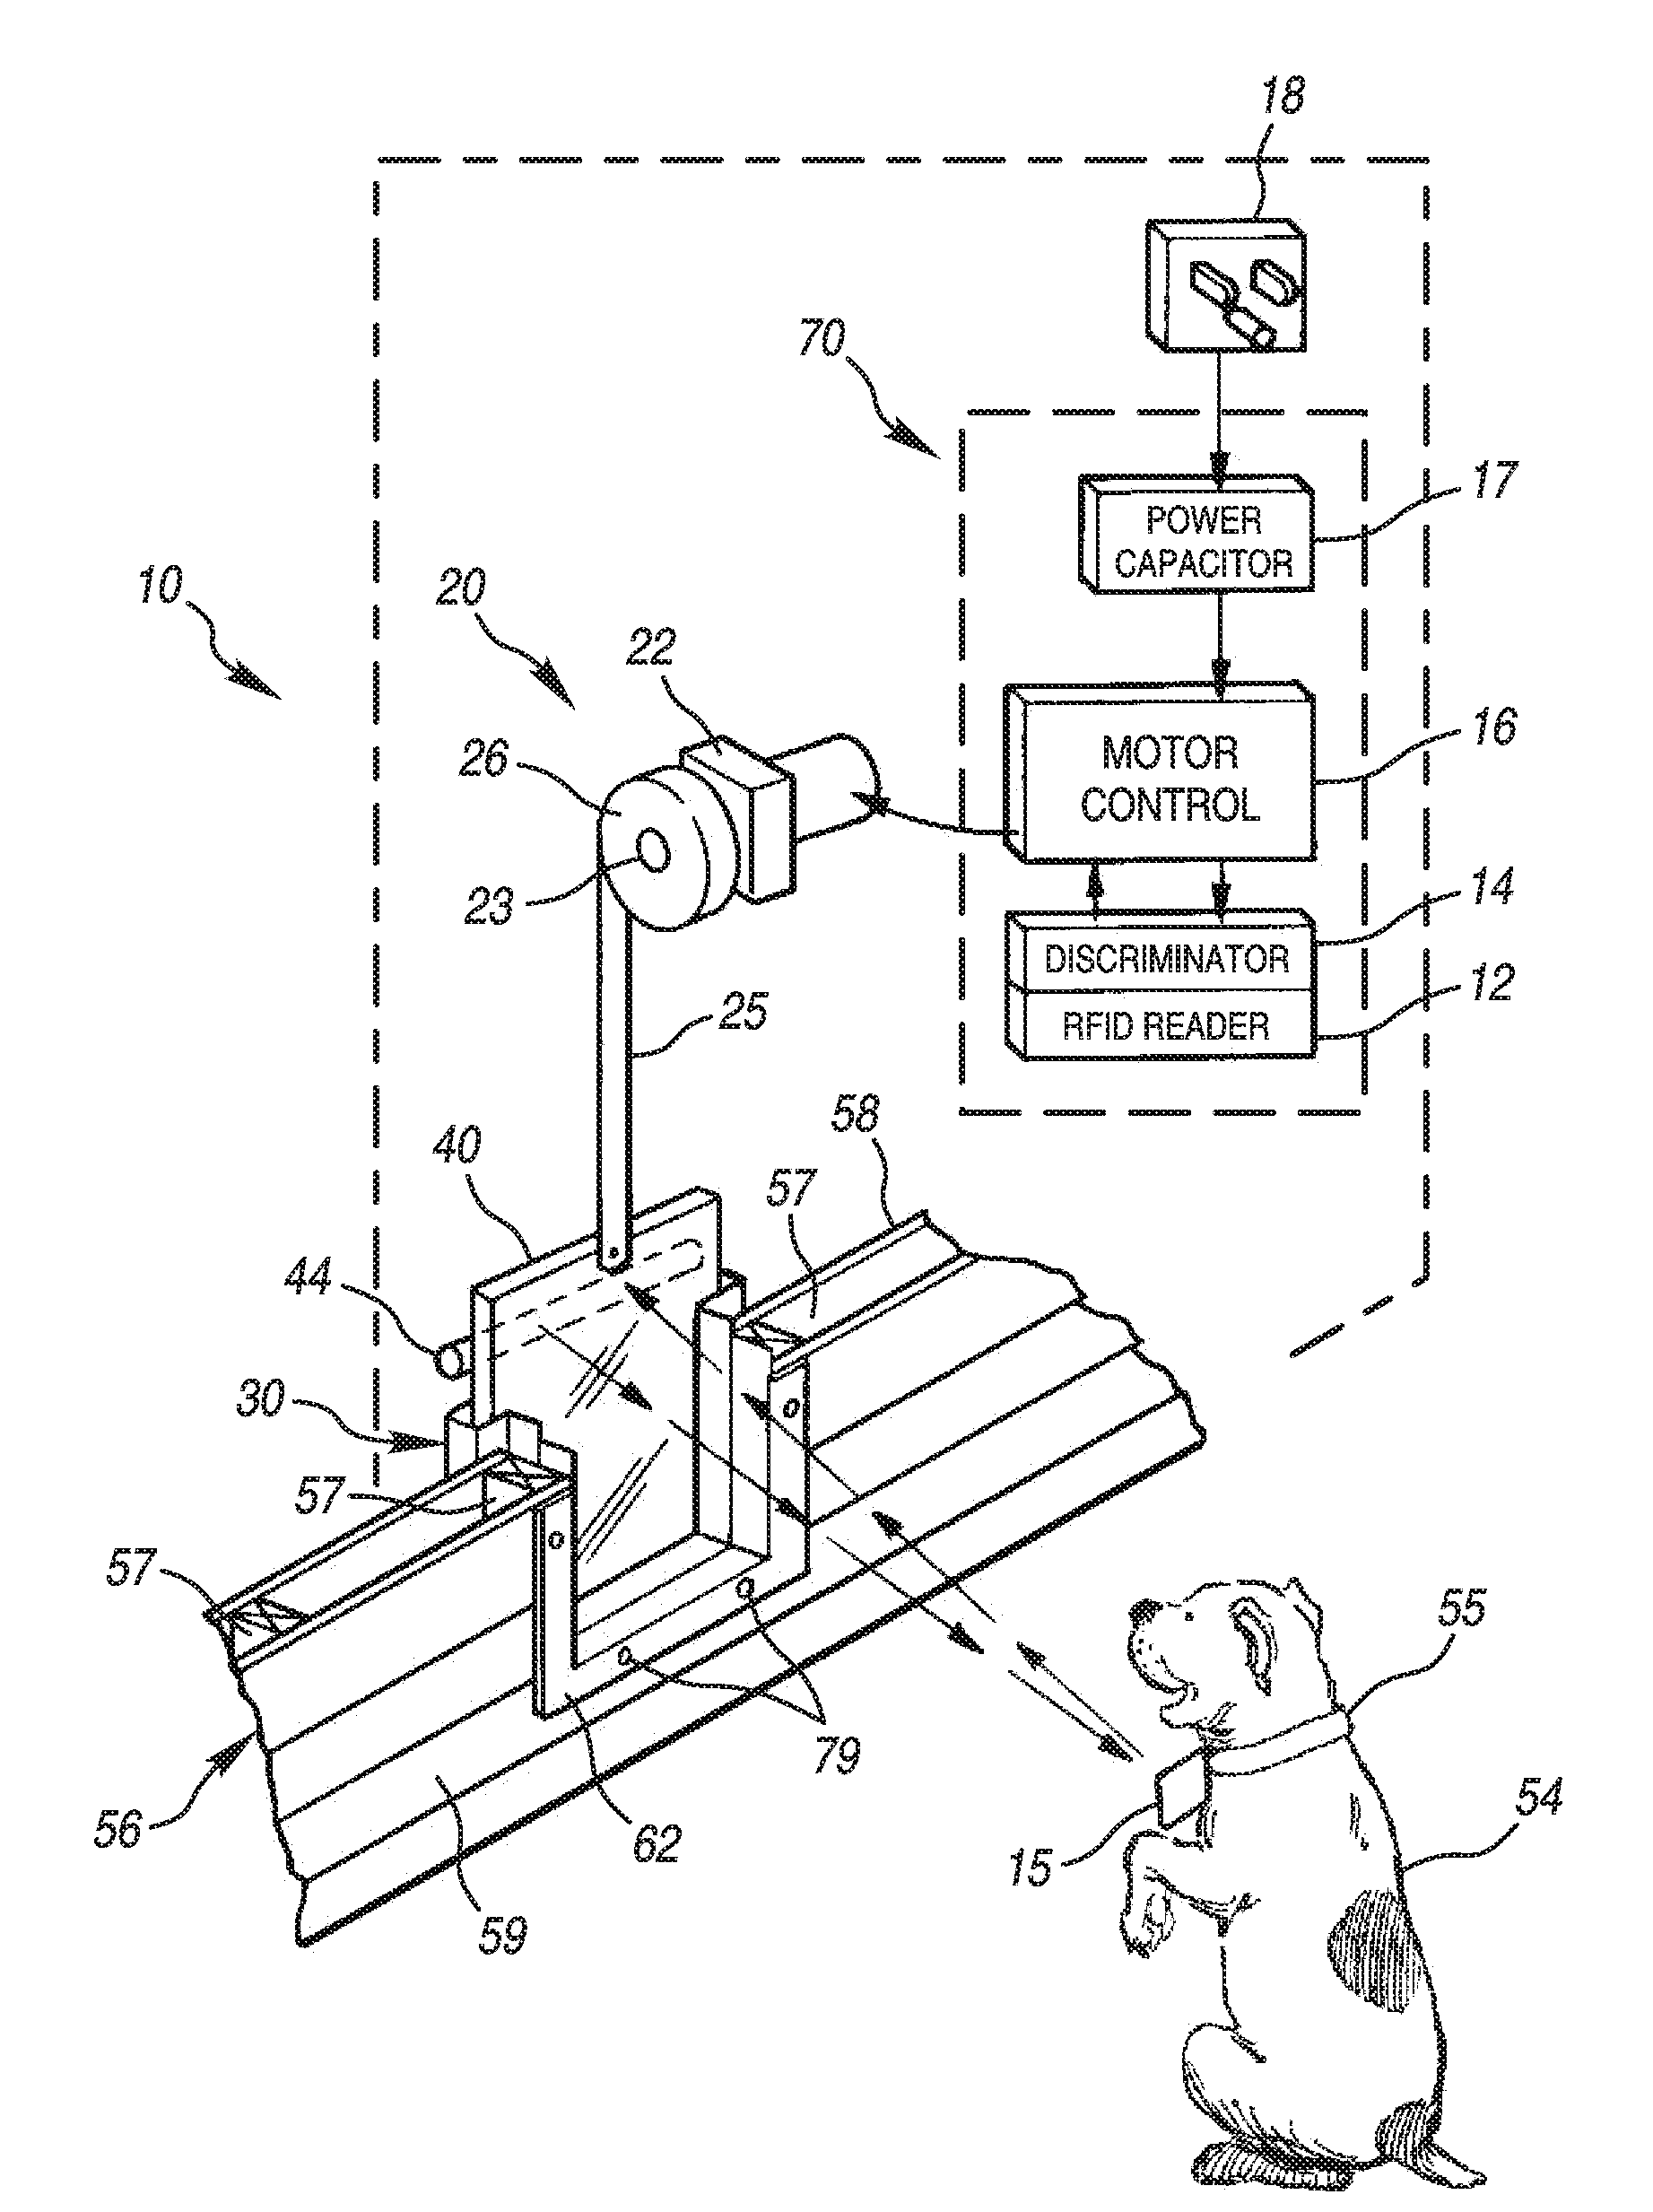 Spring-Assisted Mechanism for Raising and Lowering a Load